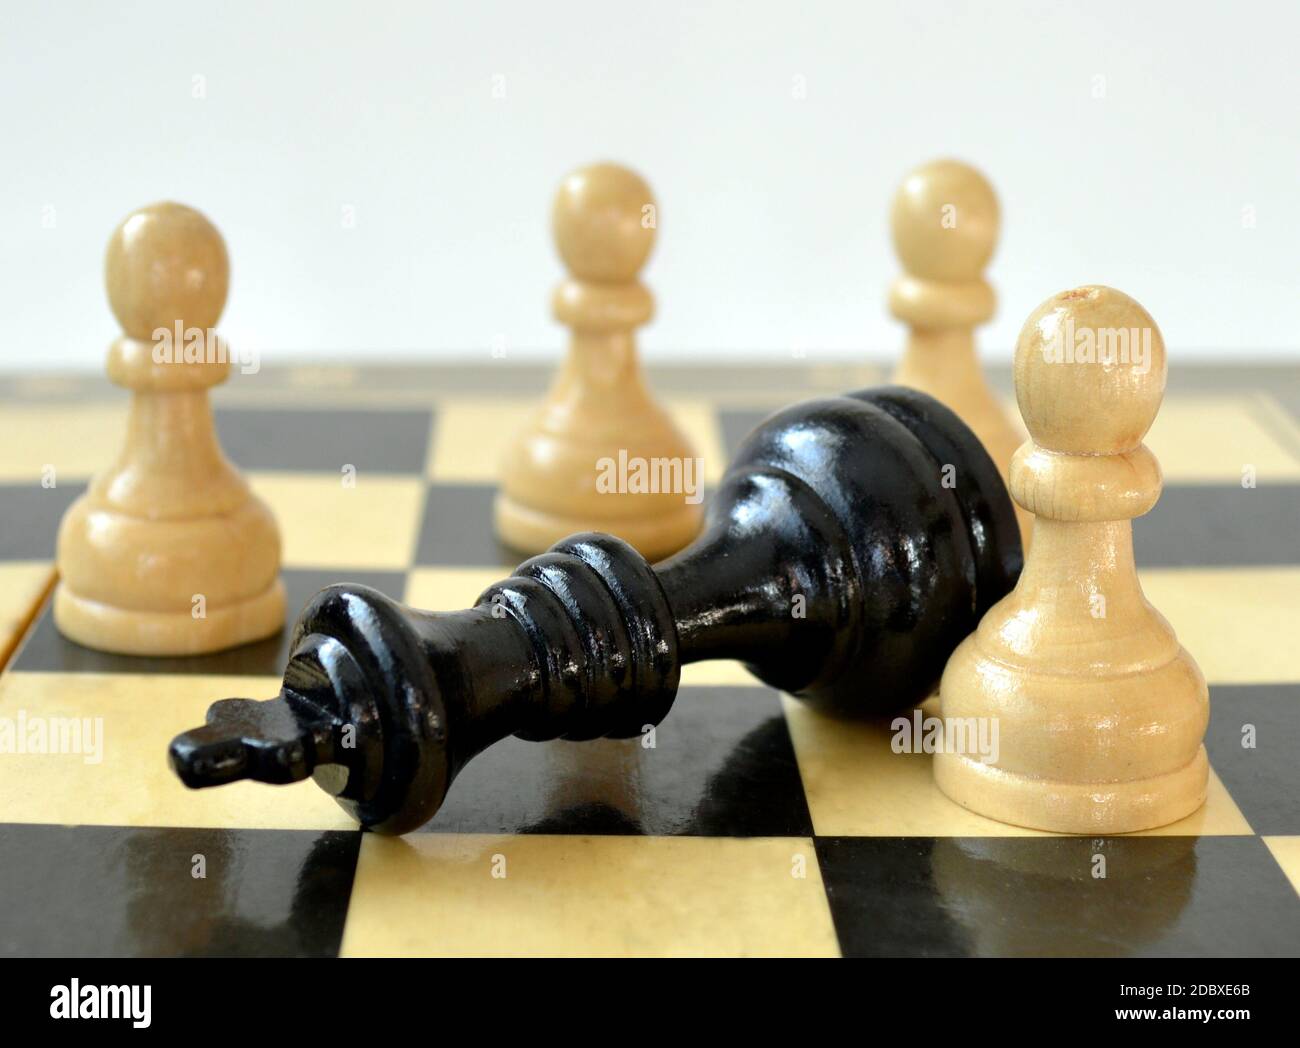 King chess piece Black and White Stock Photos & Images - Alamy